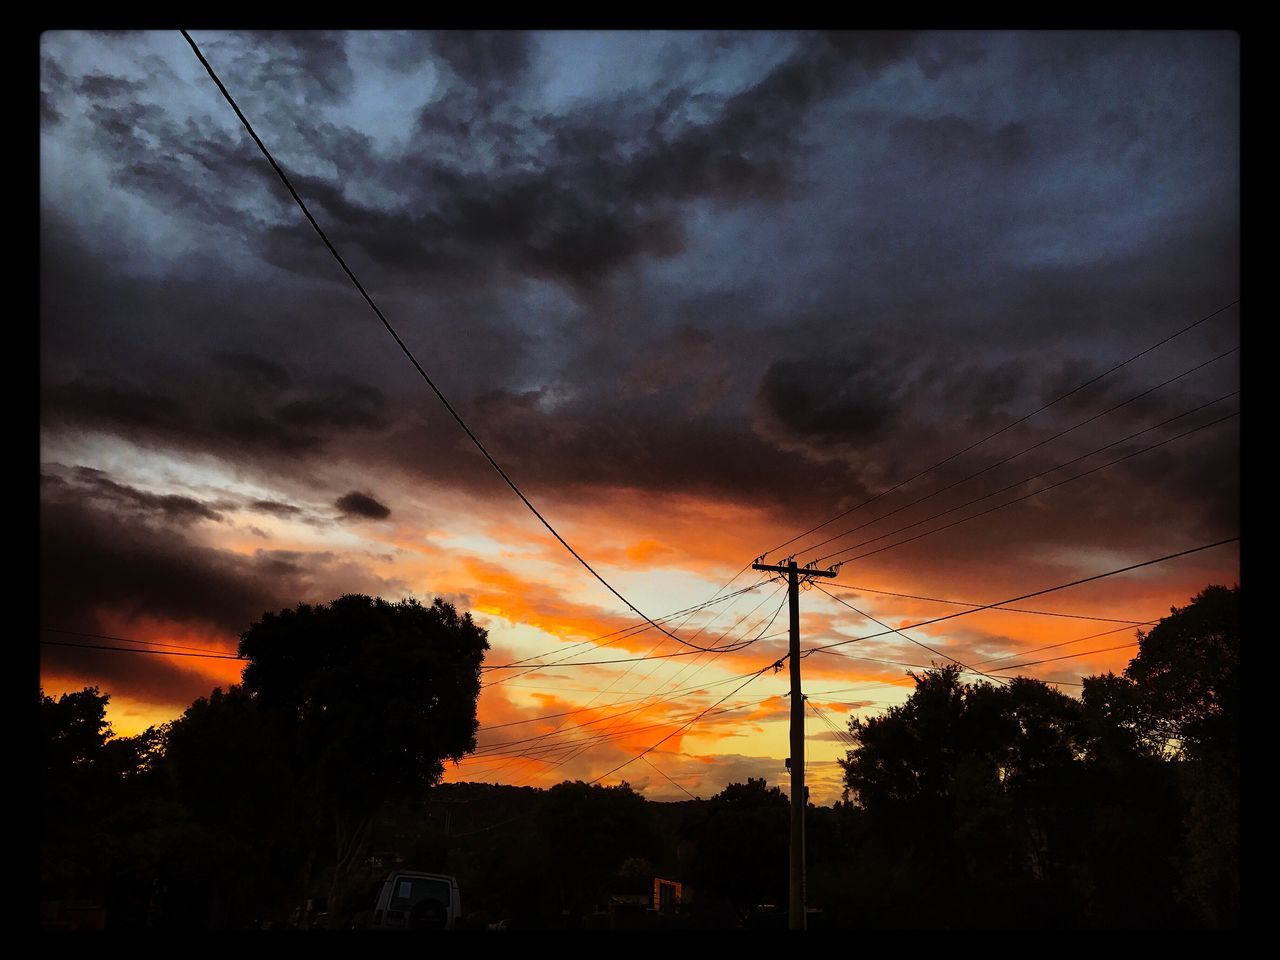 sunset, sky, electricity, cloud - sky, power supply, power line, silhouette, nature, beauty in nature, no people, outdoors, scenics, tree, connection, cable, dramatic sky, low angle view, electricity pylon, technology, day